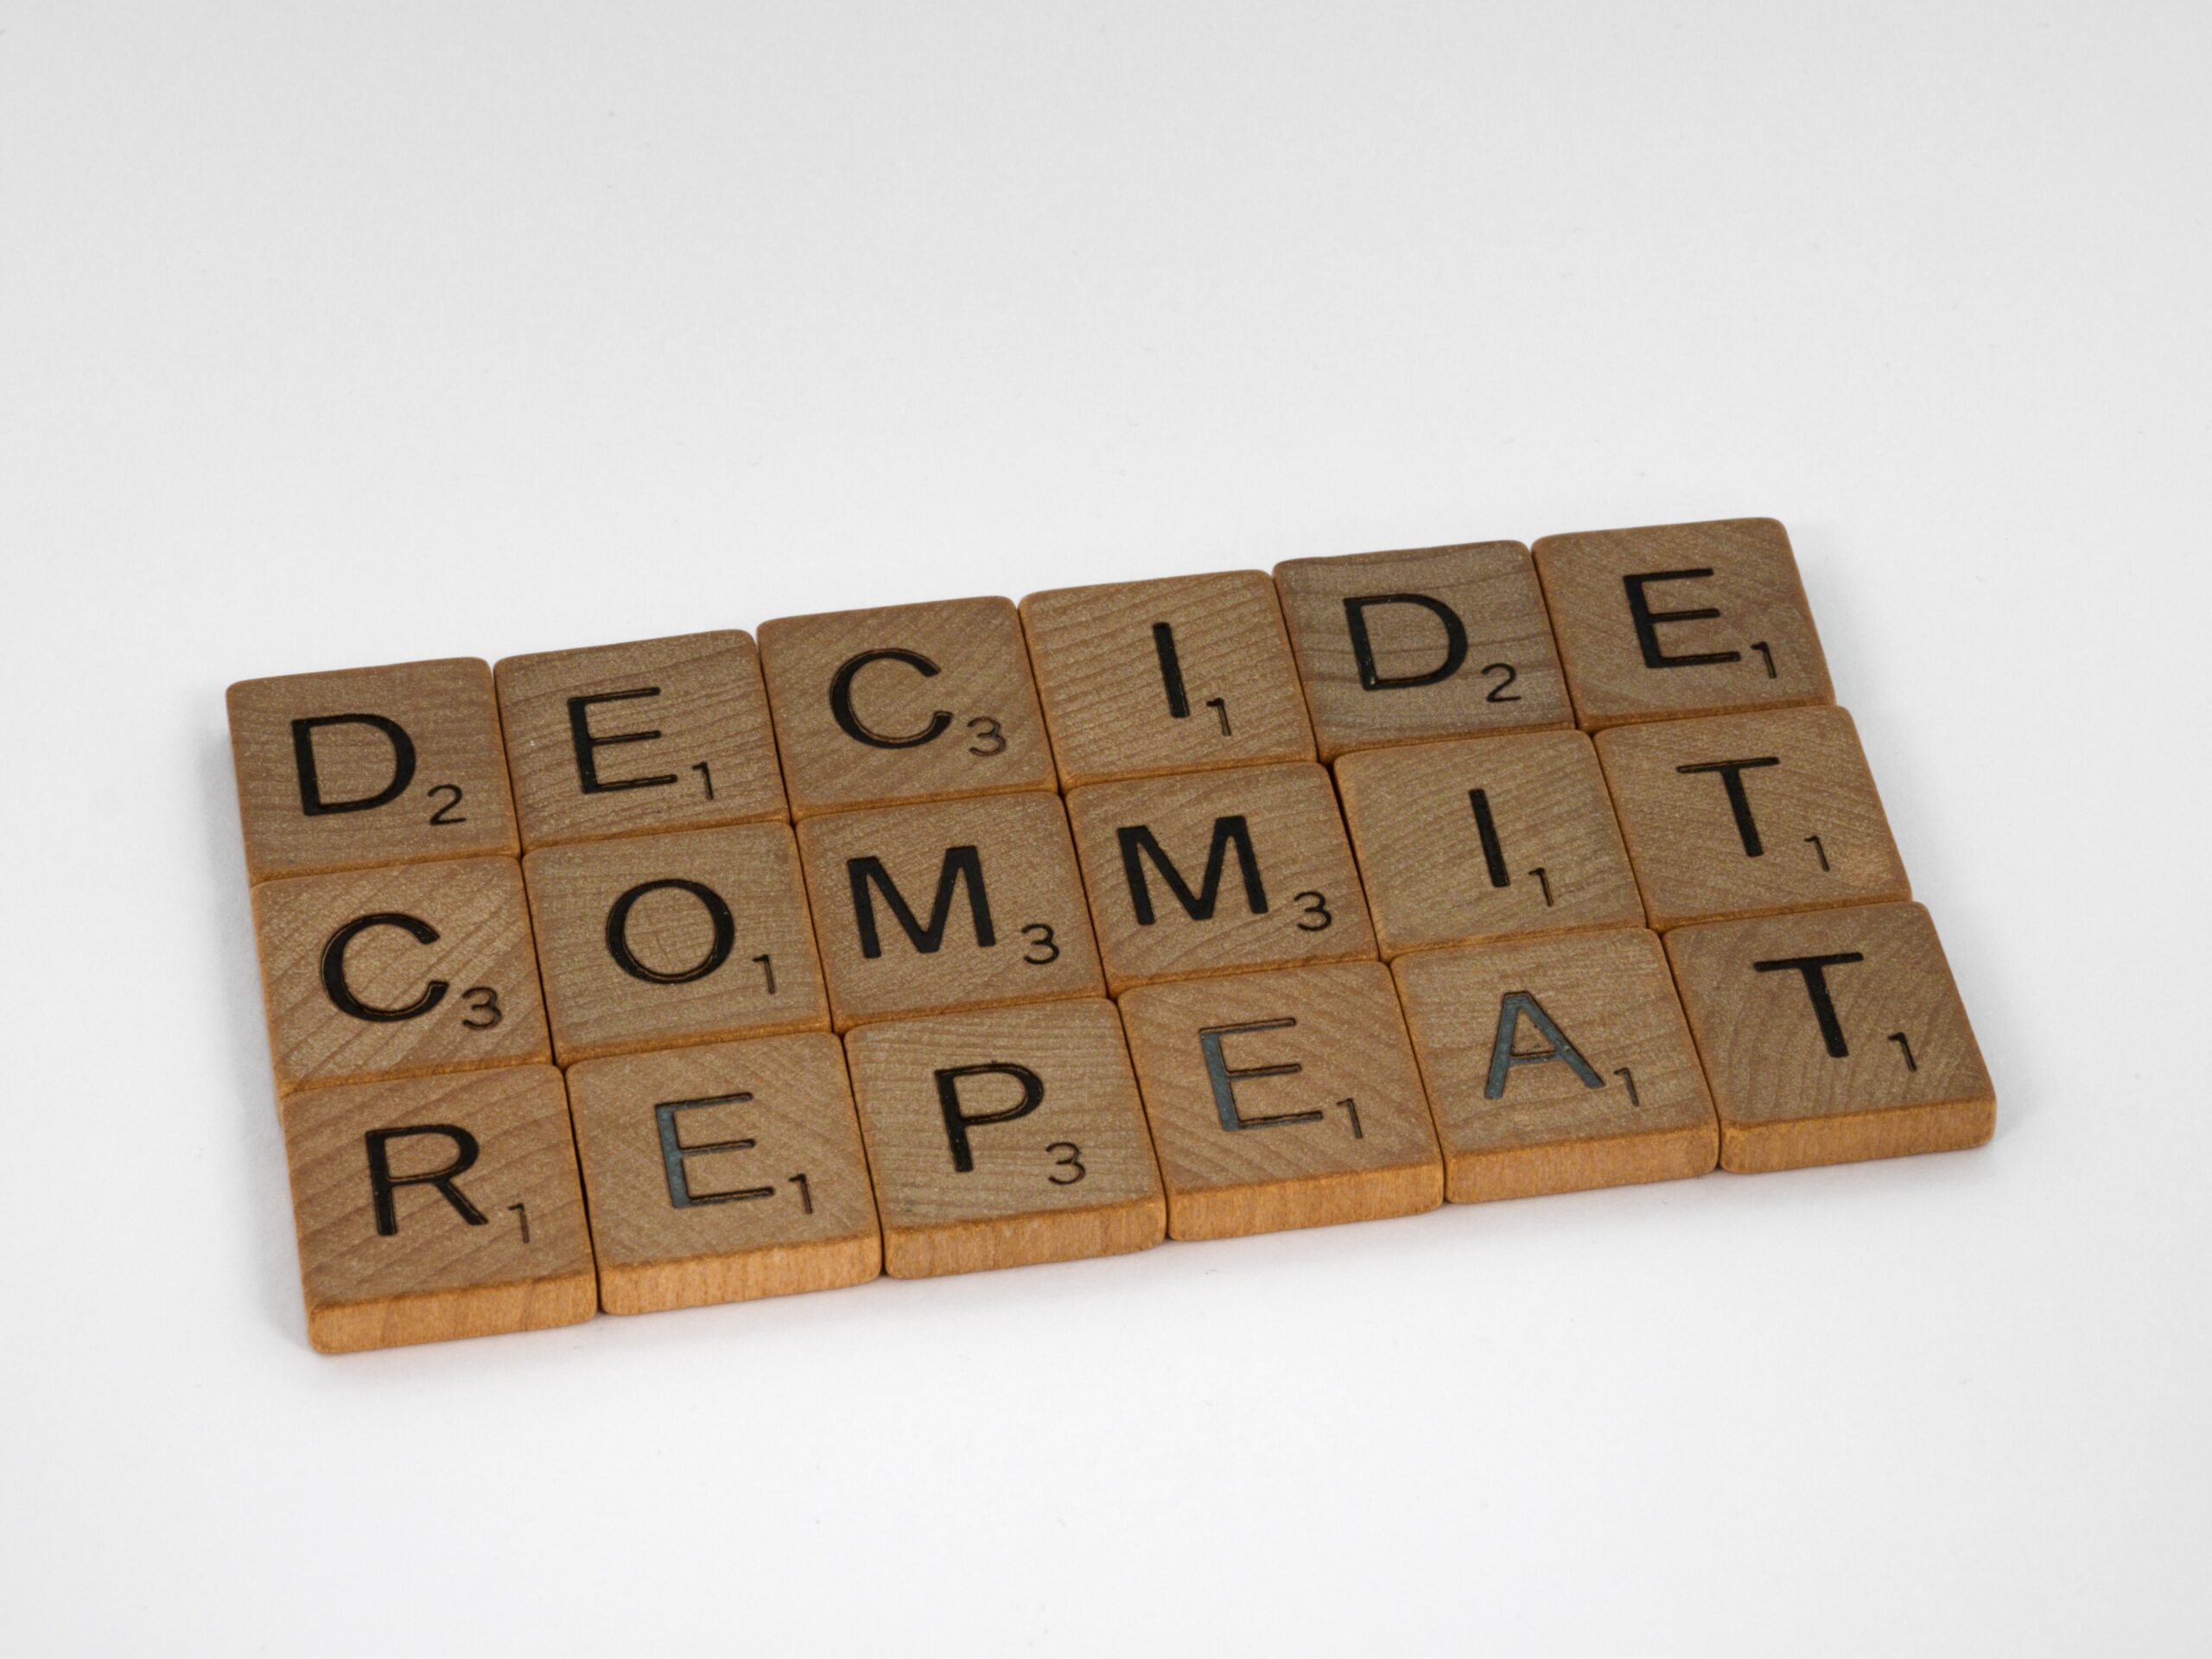 Image showing wooden scrabble tiles that spell out, Decide, Commit, Repeat, to illustrate point about donor retention in respect of an online donation process